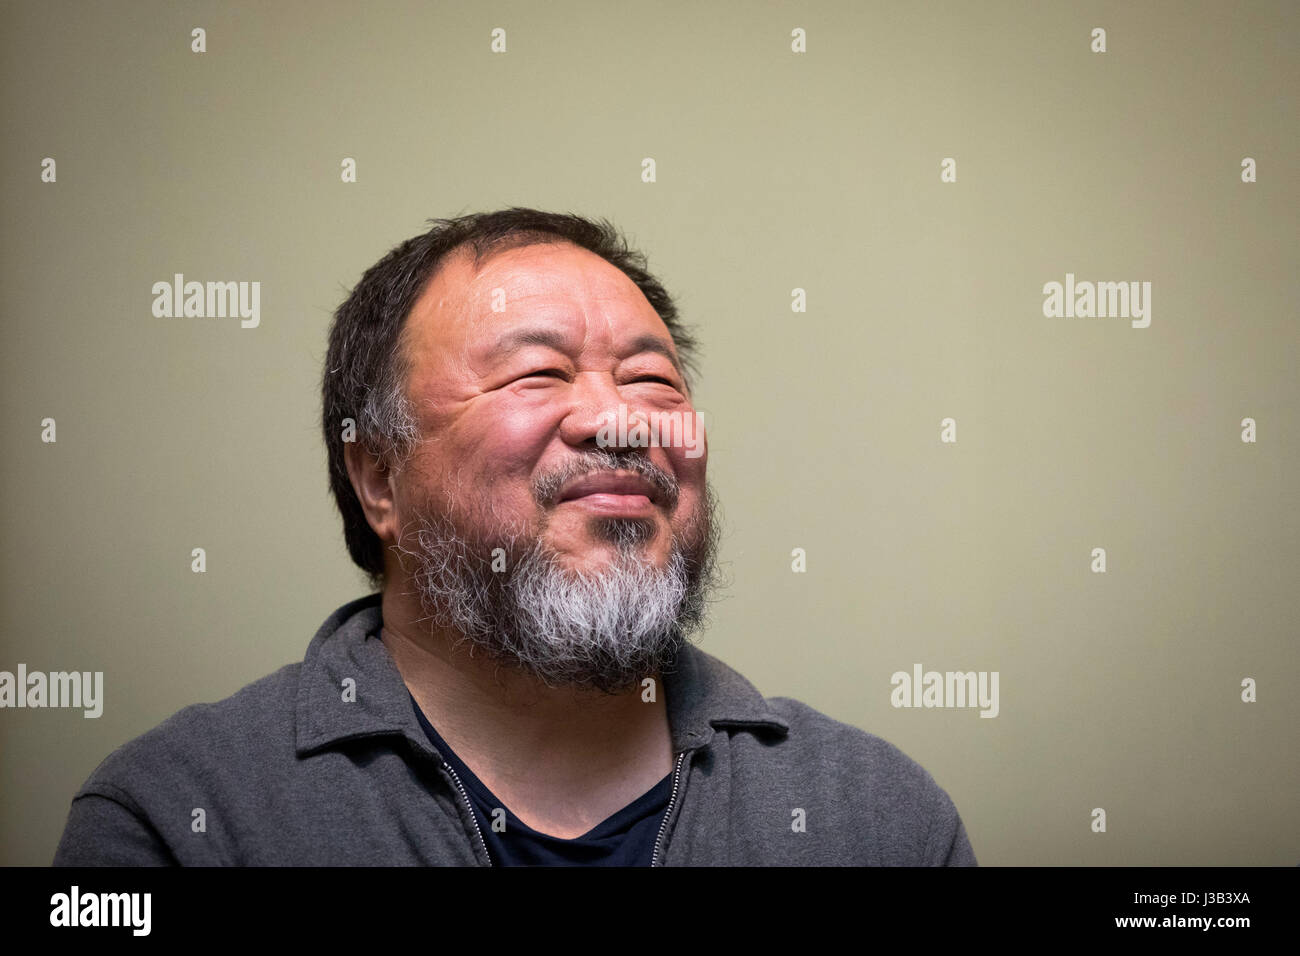 Schwerin, Germany. 4th May, 2017. dpatop - The Chinese artist Ai Weiwei speaks during a discussion in the Galerie Alte & Neue Meister at the State Museum in Schwerin, Germany, 4 May 2017. Ai Weiwei spoke on the work and influence of the French-American painter and object artist Marcel Duchamp (1887-1968). Photo: Christian Charisius/dpa/Alamy Live News Stock Photo